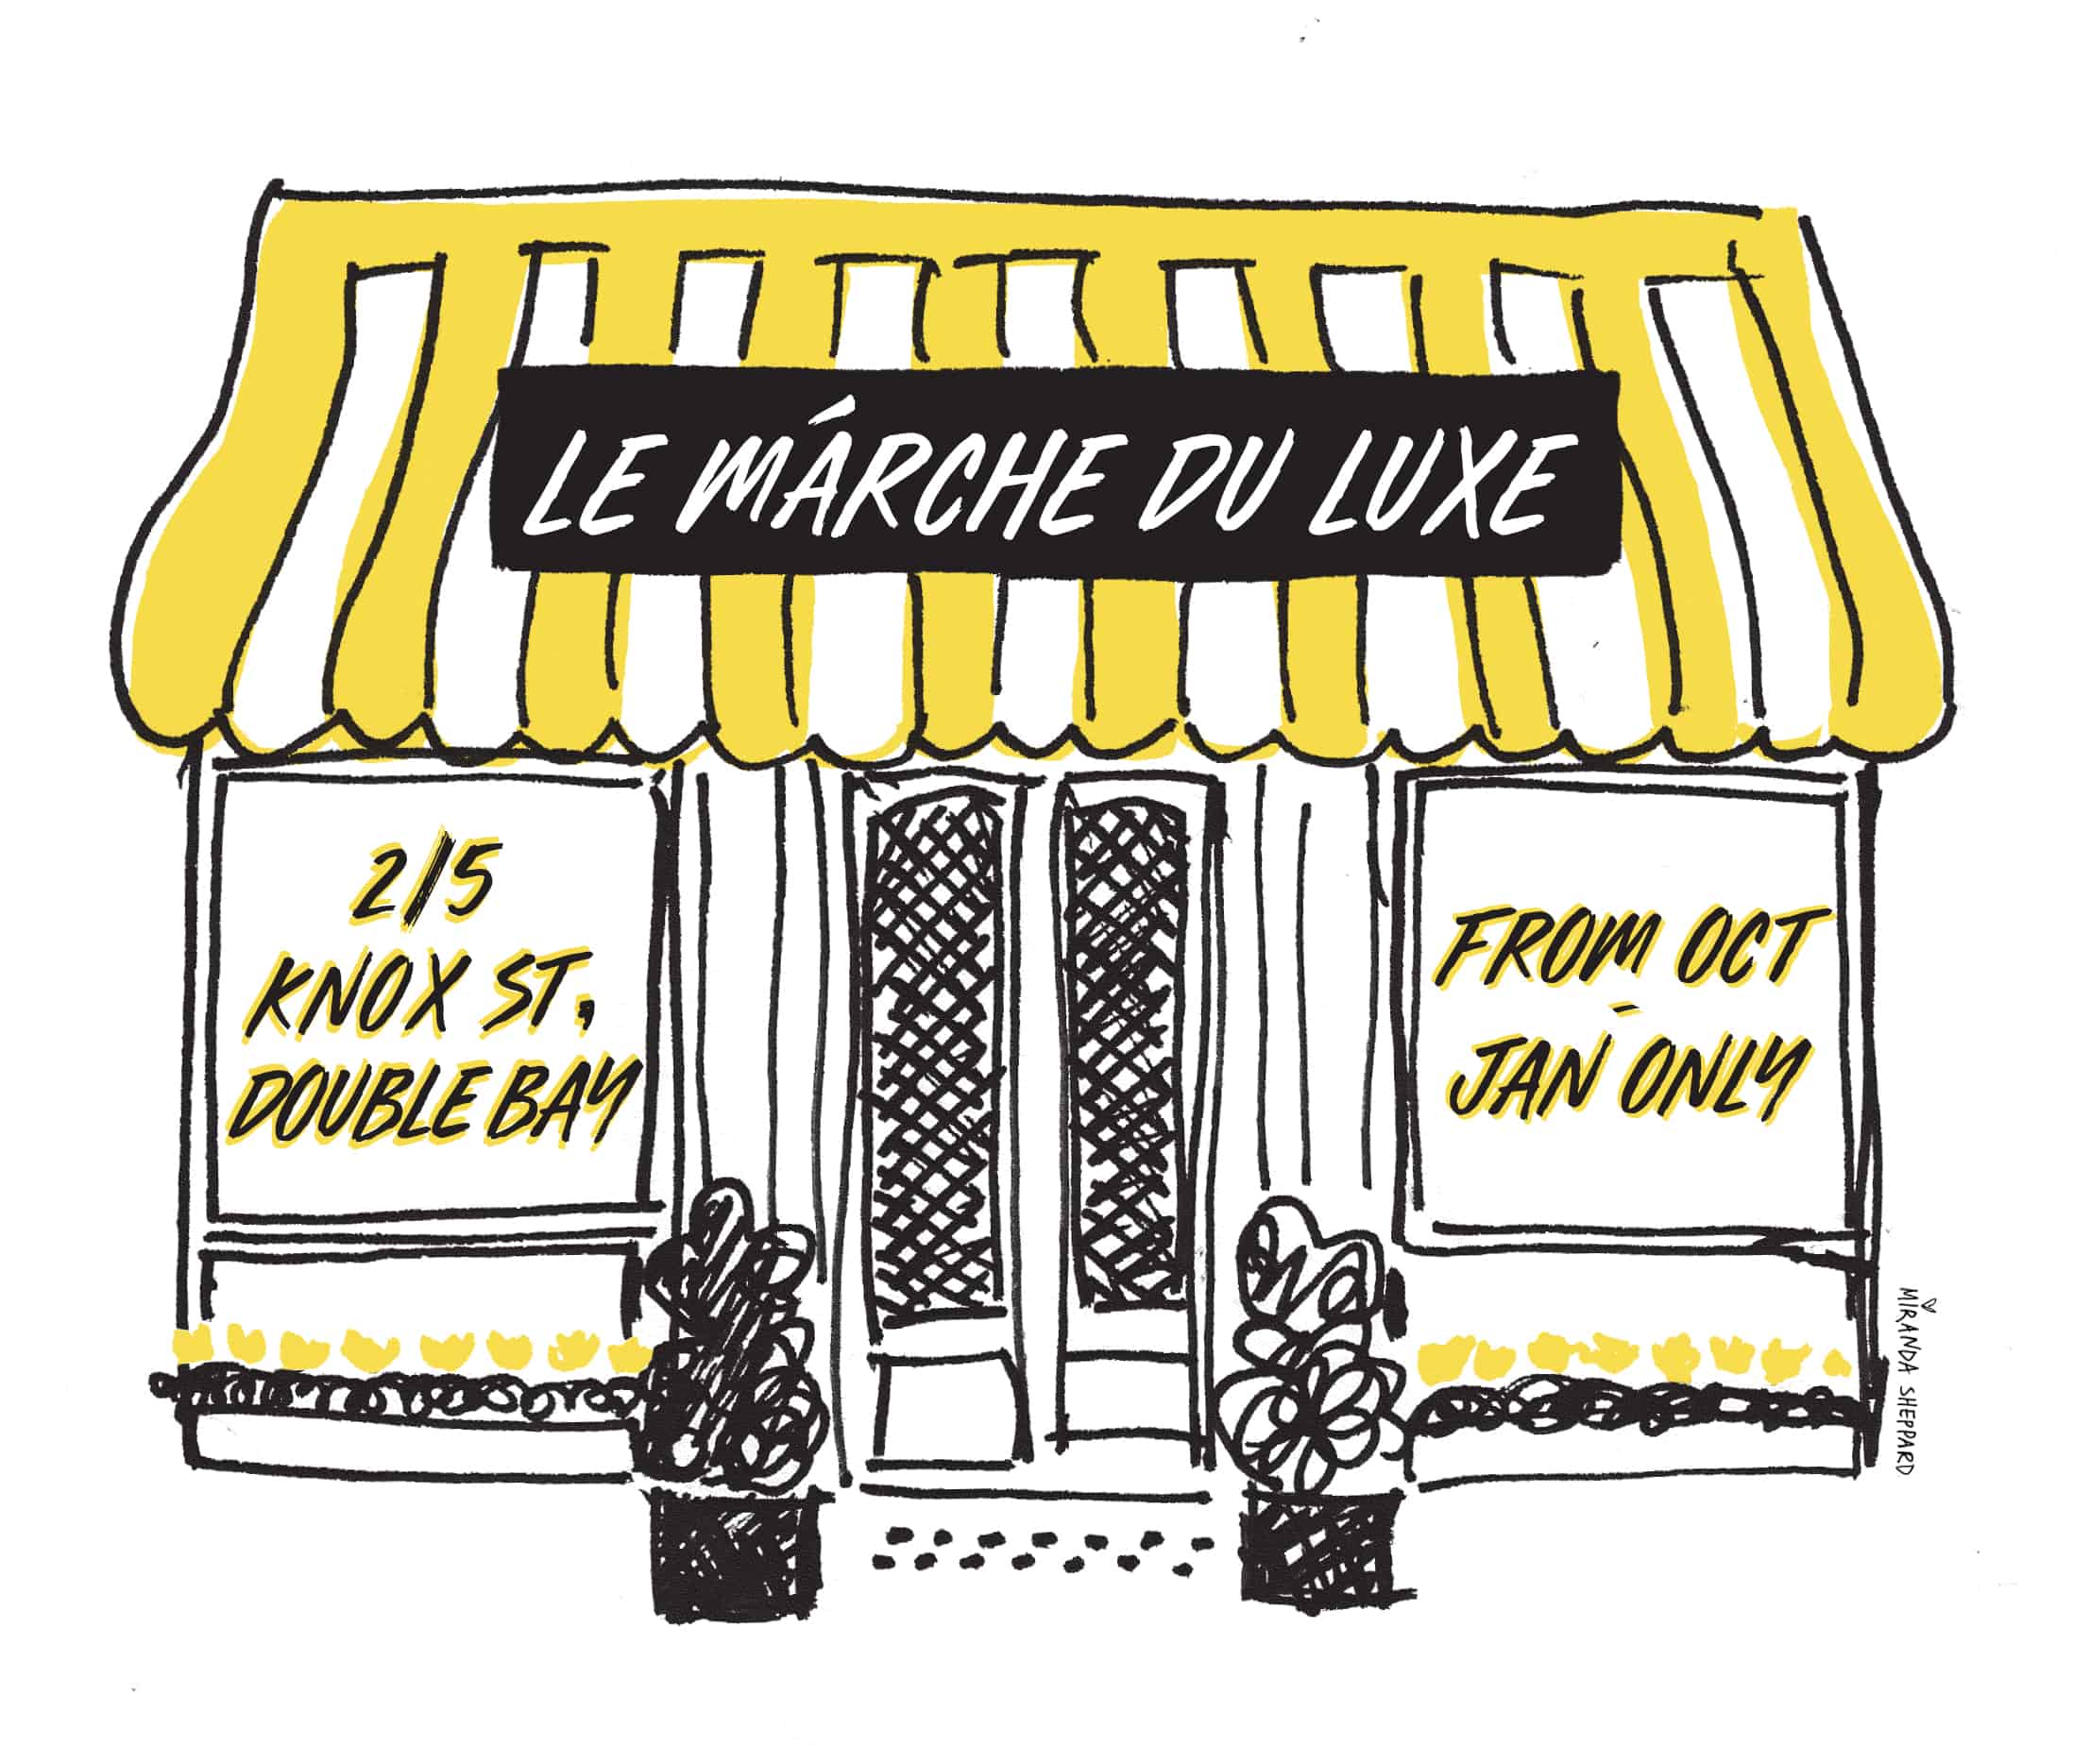 Visit Le Marché du Luxe in Double Bay for all your summer needs